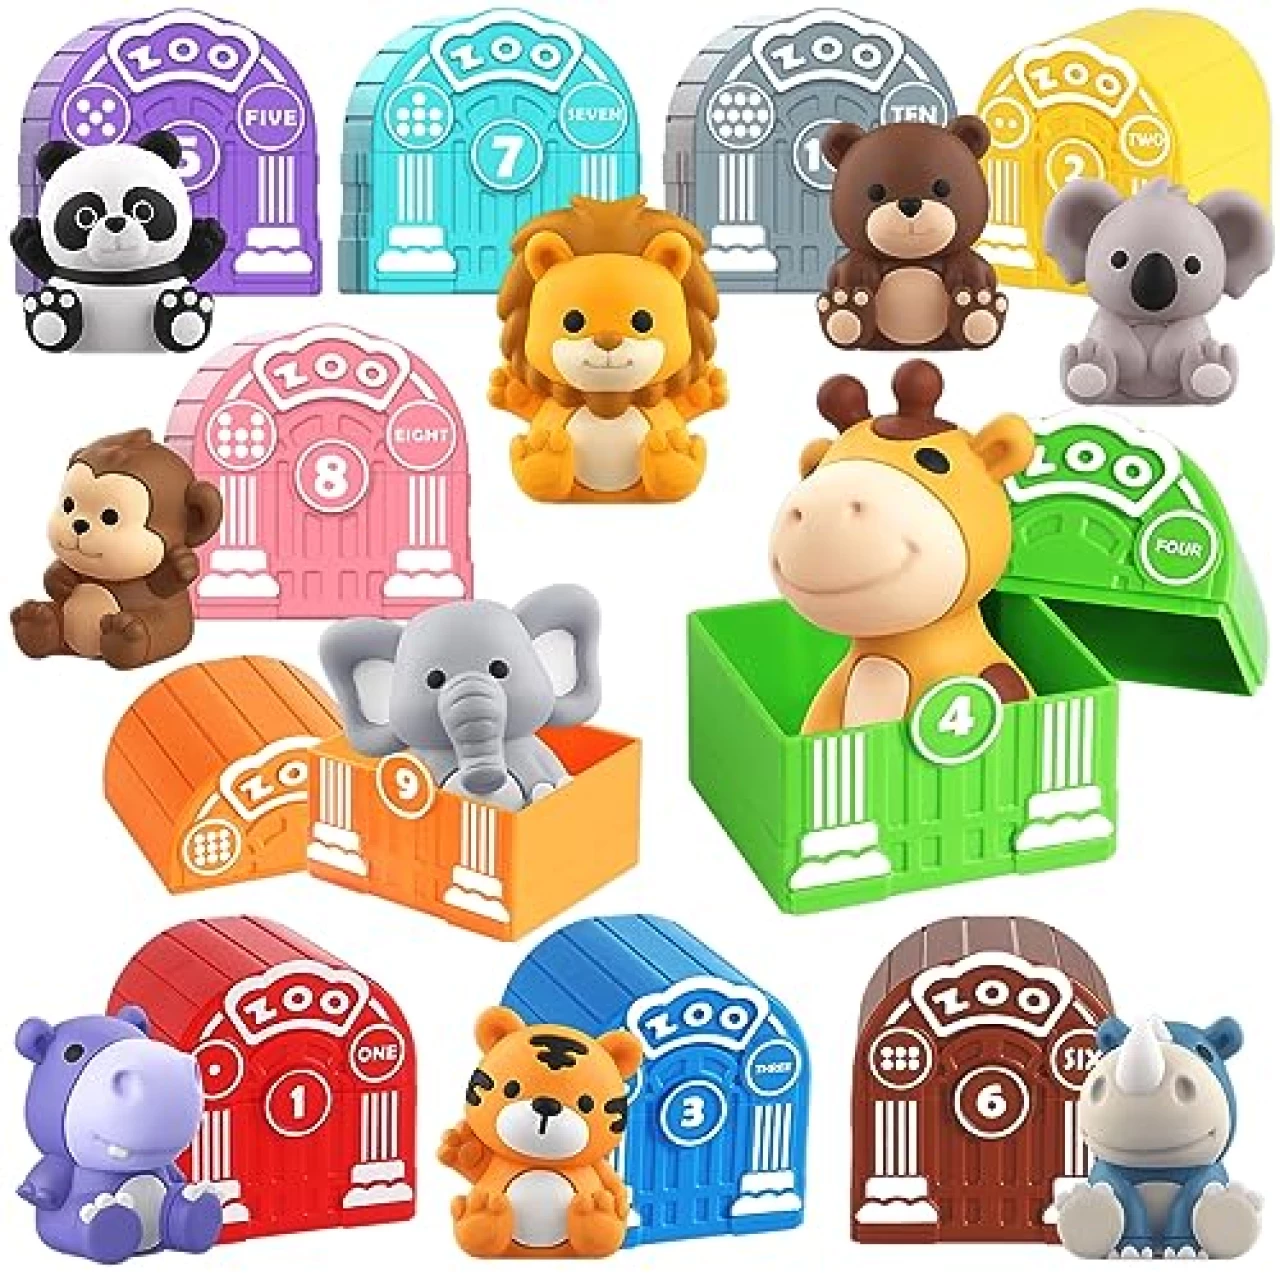 Toddler Toy for 1 2 3+ Years Old, Learning Toy for Toddlers with 20PCS Safari Animal Toy, Montessori Educational Toy for Kids